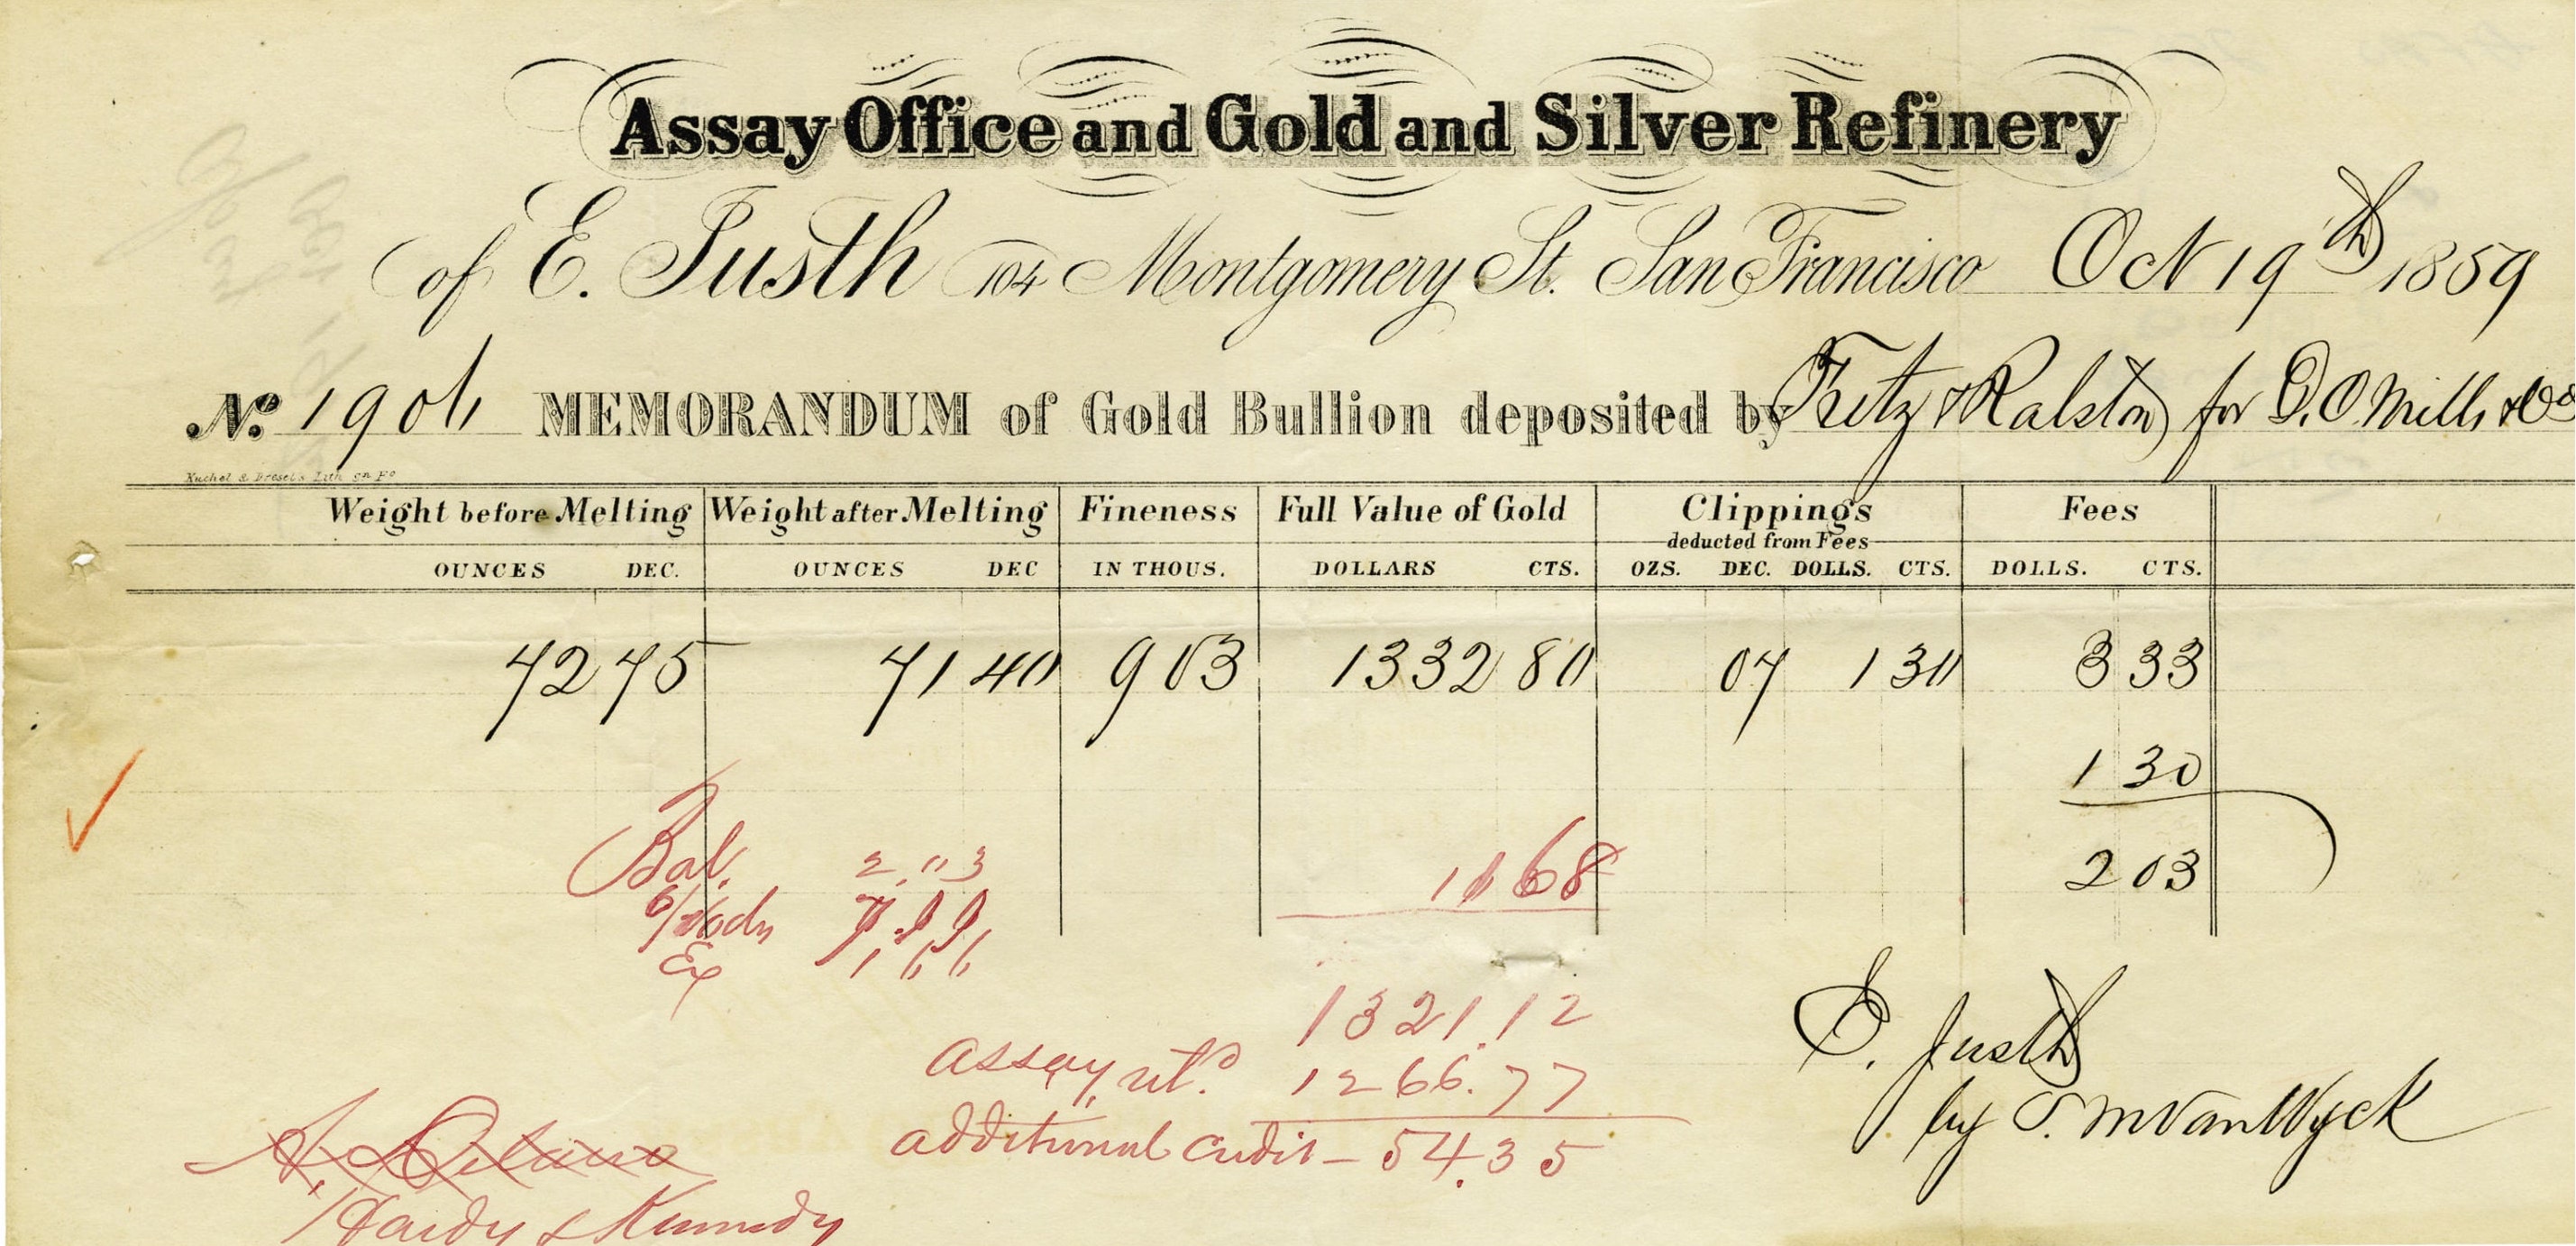 A depository receipt for gold from 1859